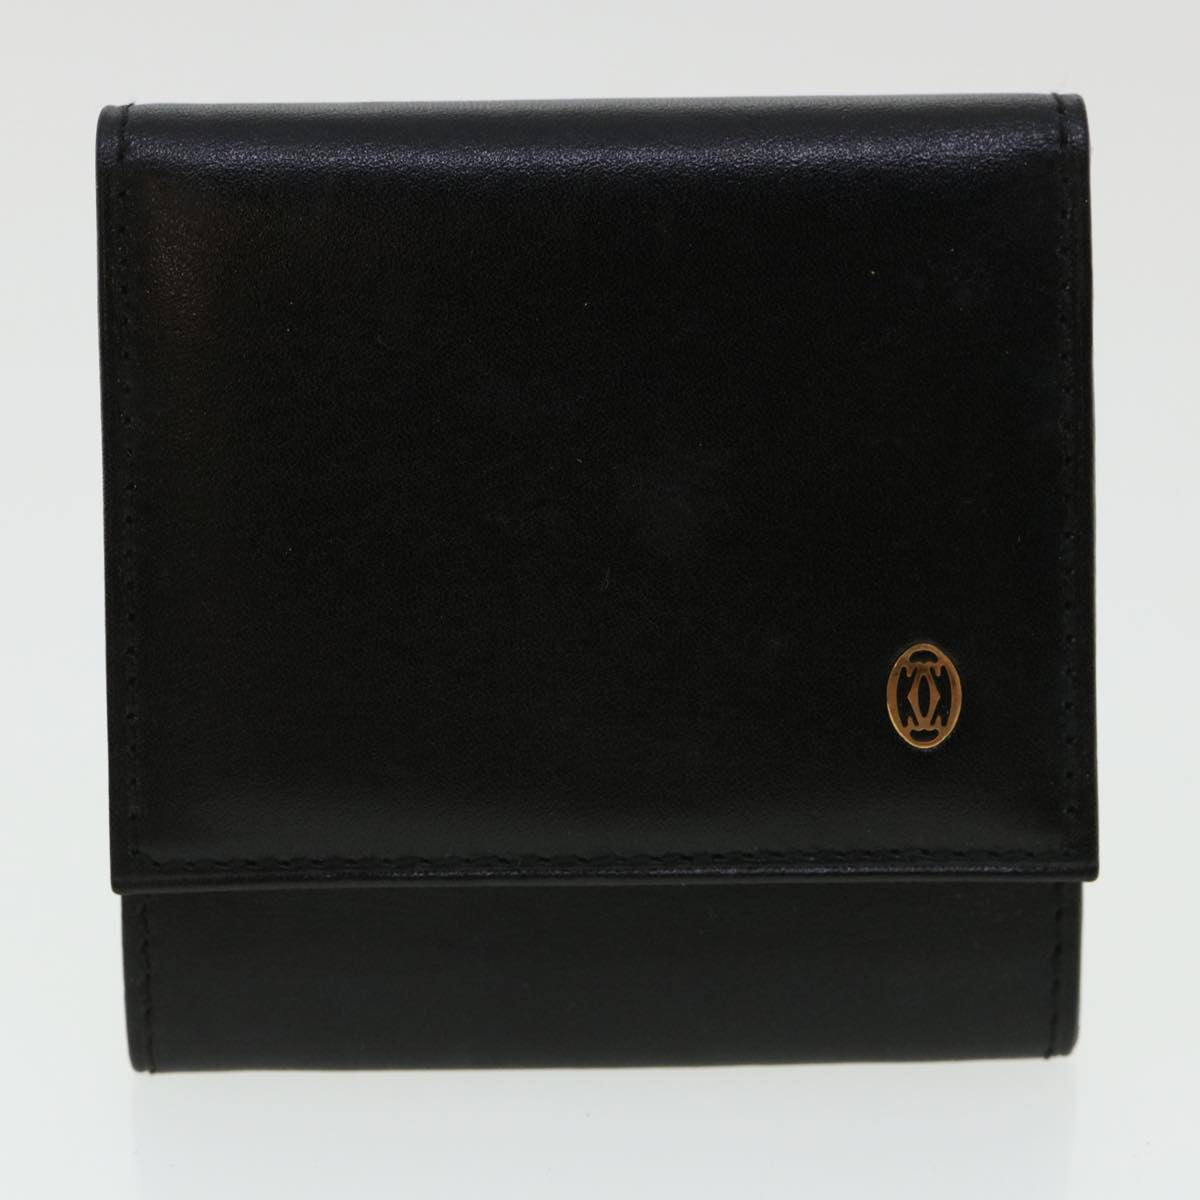 CARTIER Coin Purse Leather 2Set Black Brown Auth 33137